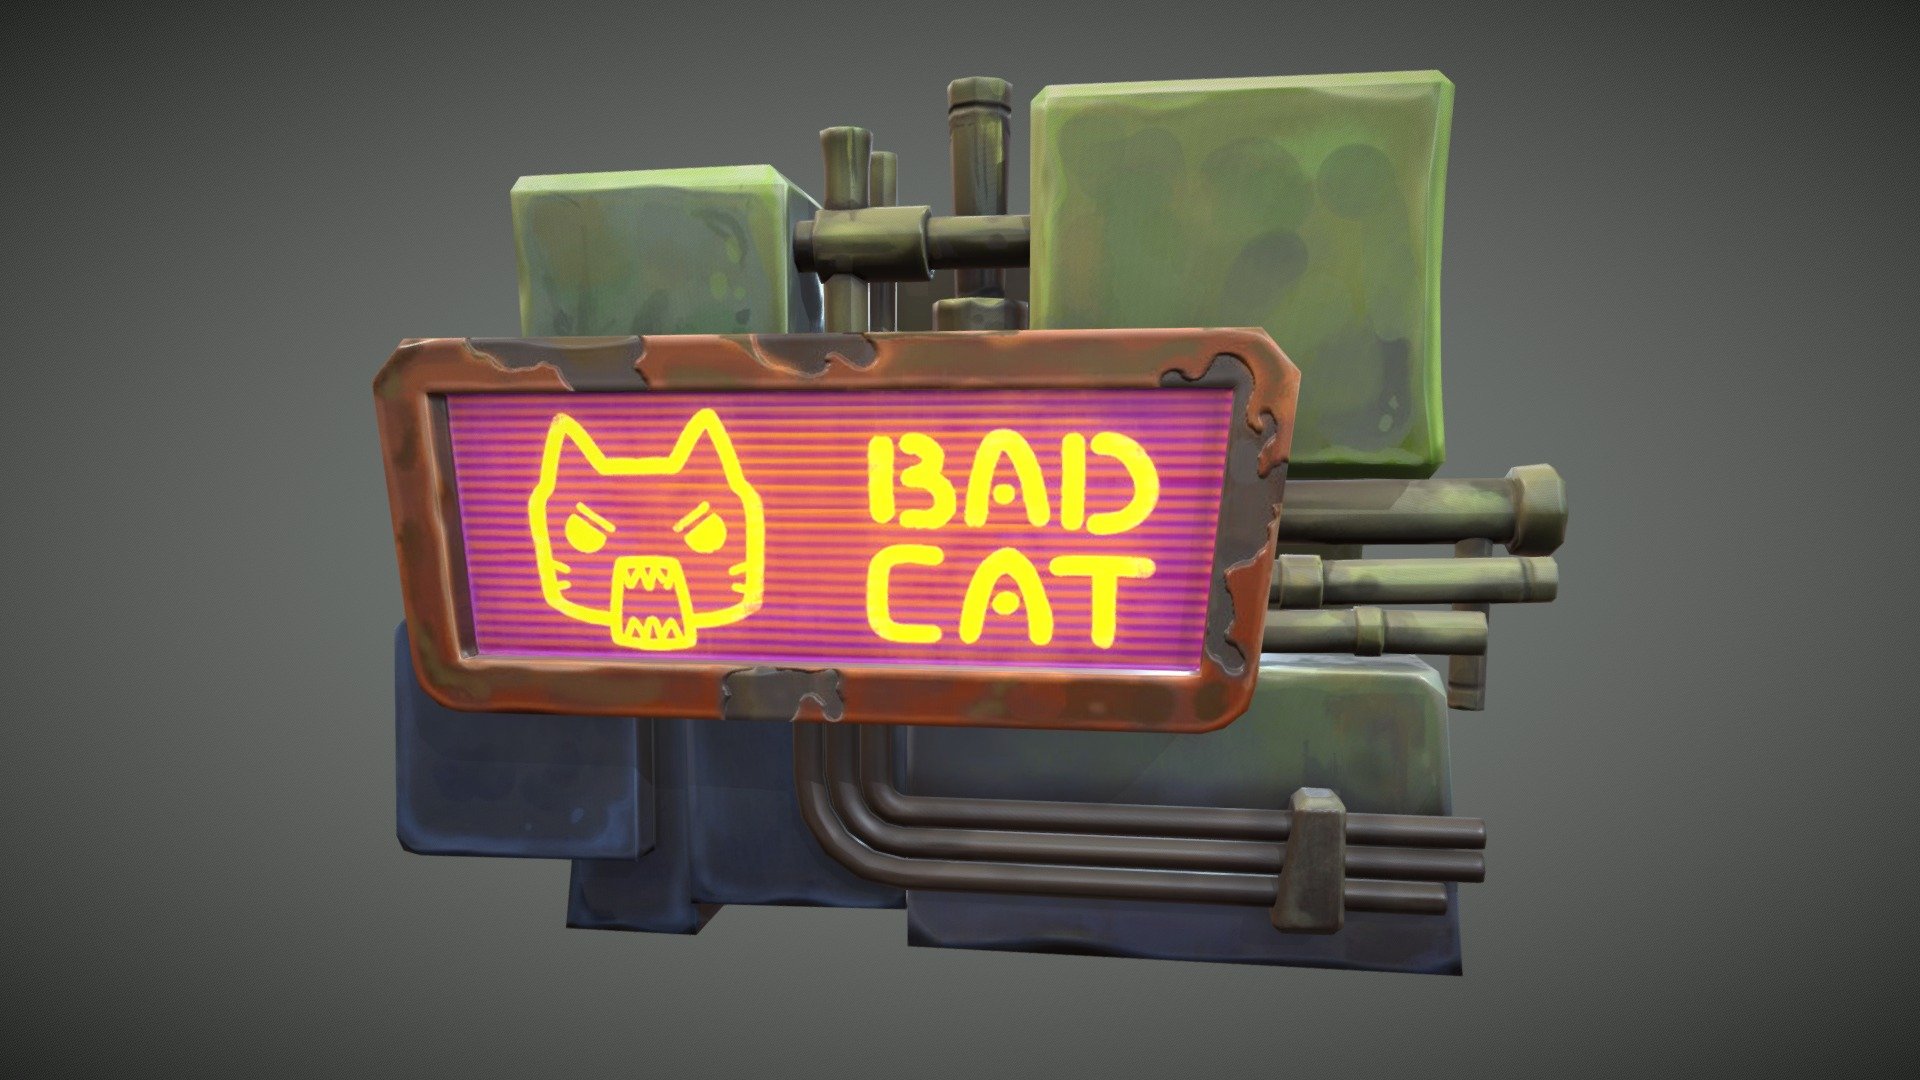 Hello!
I am glad to share with you my new work based on the concept from props set by Ruslana Gus:
https://www.artstation.com/artwork/8e4YnE

The main goal for me was to create and paint signboard according to the style of the concept. 
There was minimum of sculpting and maximum of painting.

I will be very glad to have some feedback about my work 3d model